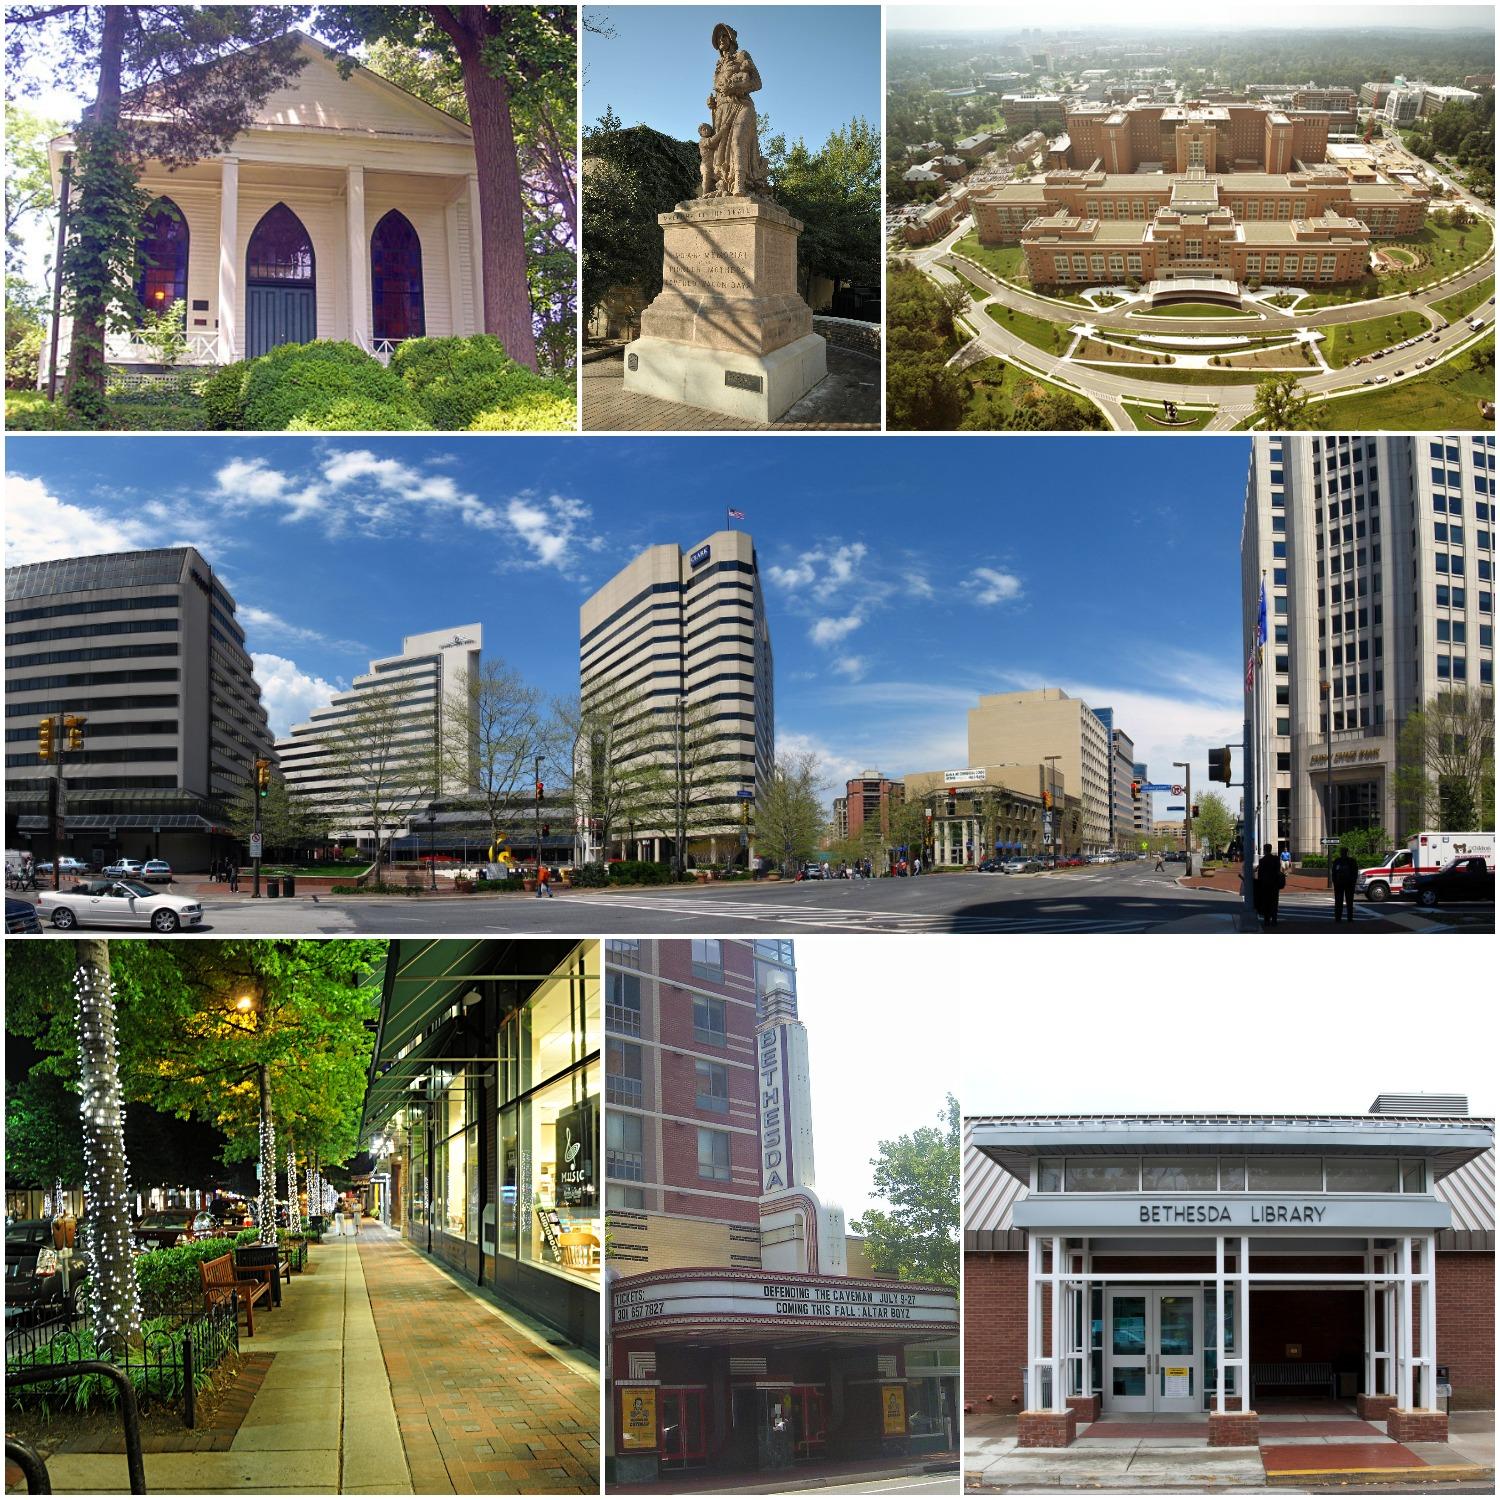 A collage of buildings

Description automatically generated with medium confidence